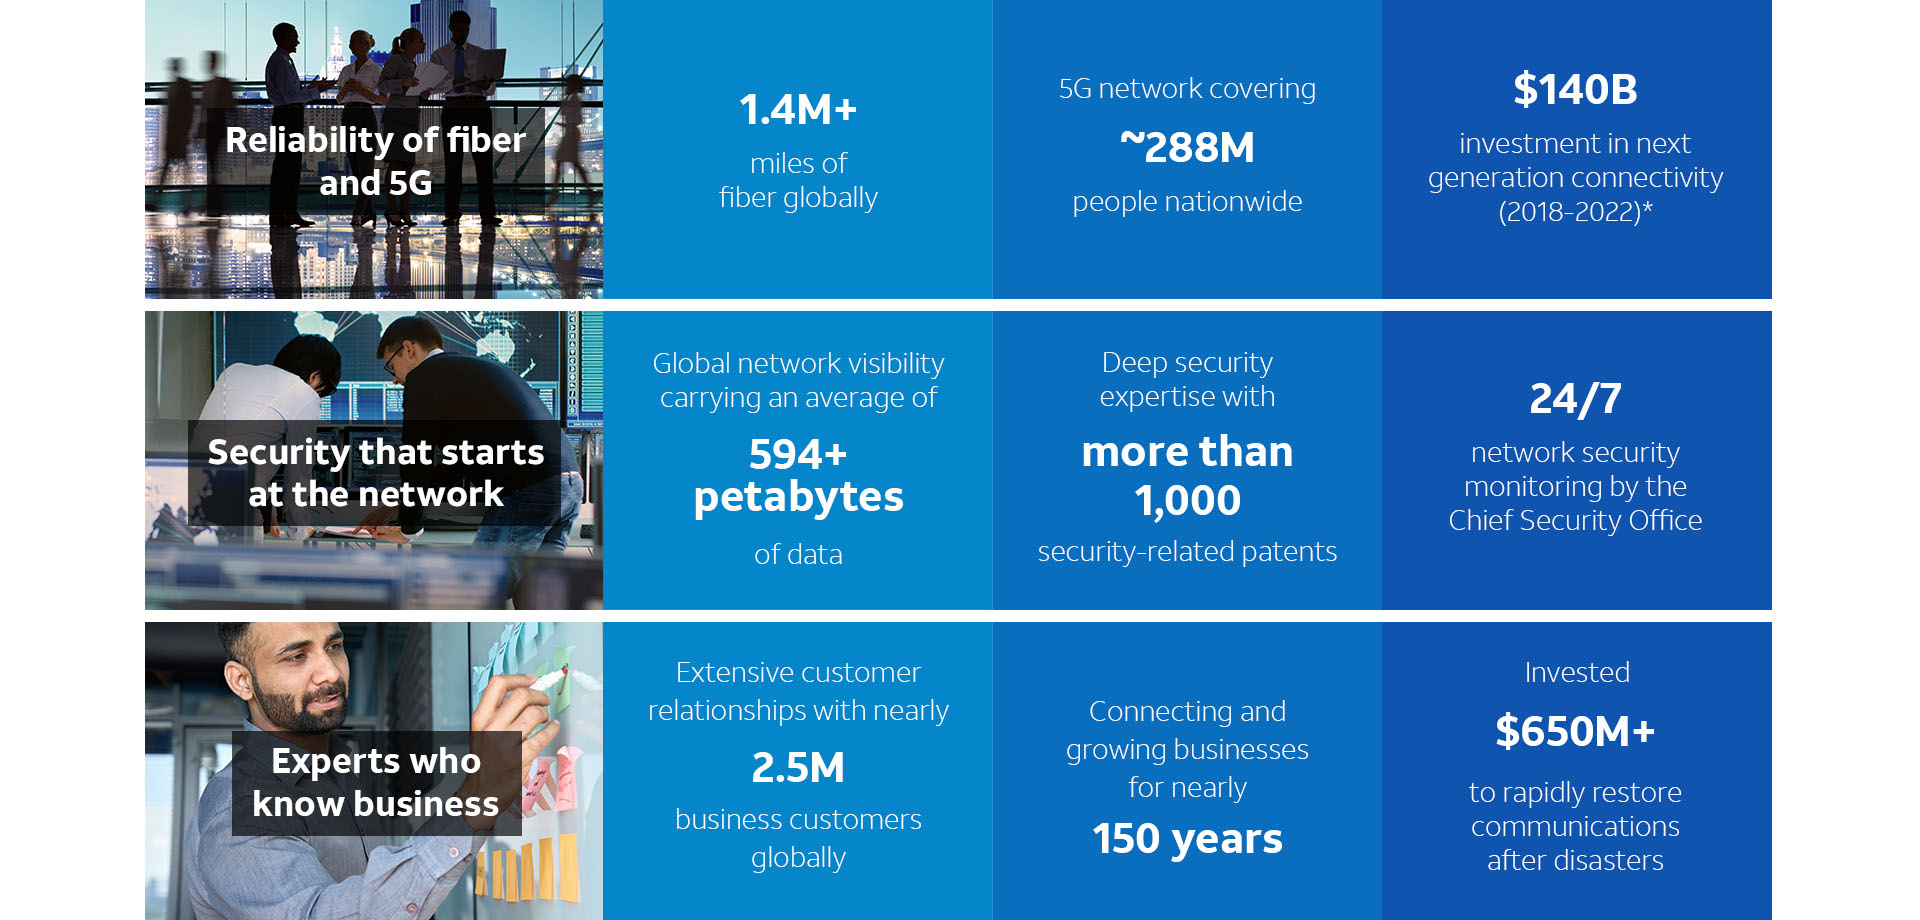 Graphic stat image conveying 5G network covering ~288M people nationwide, 24/7 network security monitoring by the Chief Security Officer, and extensive customer relationships with nearly 2.5M business customers globally. 